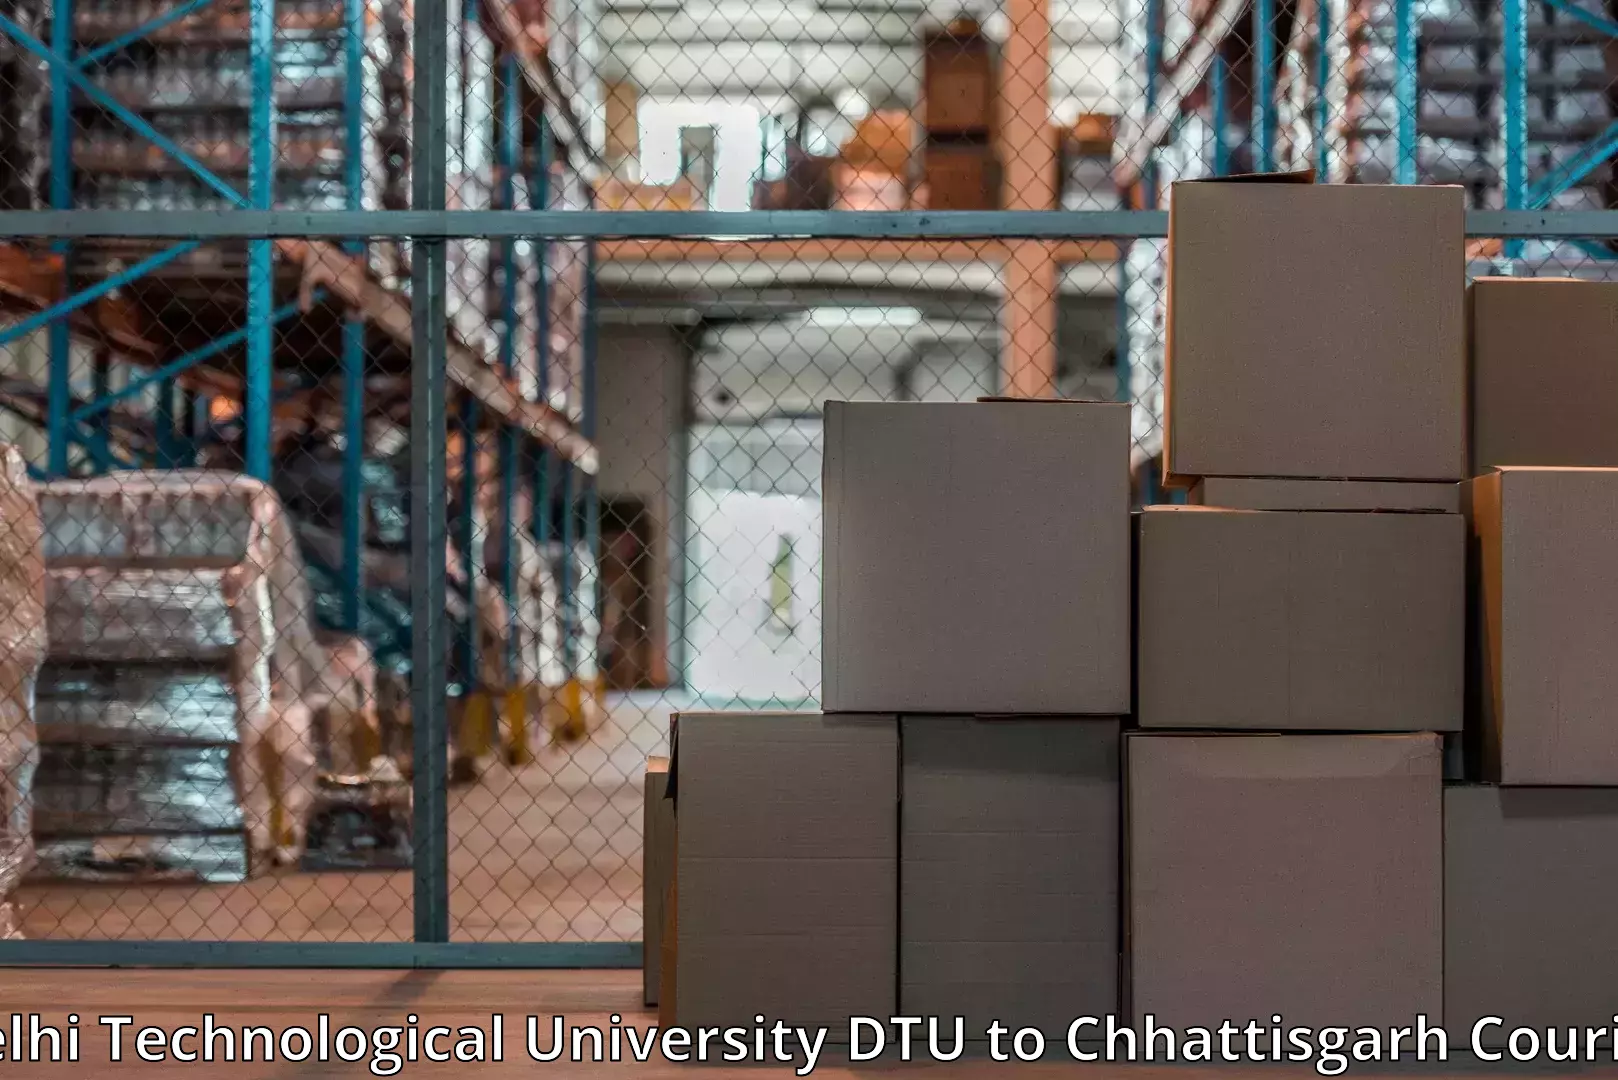 Budget-friendly movers Delhi Technological University DTU to Basna